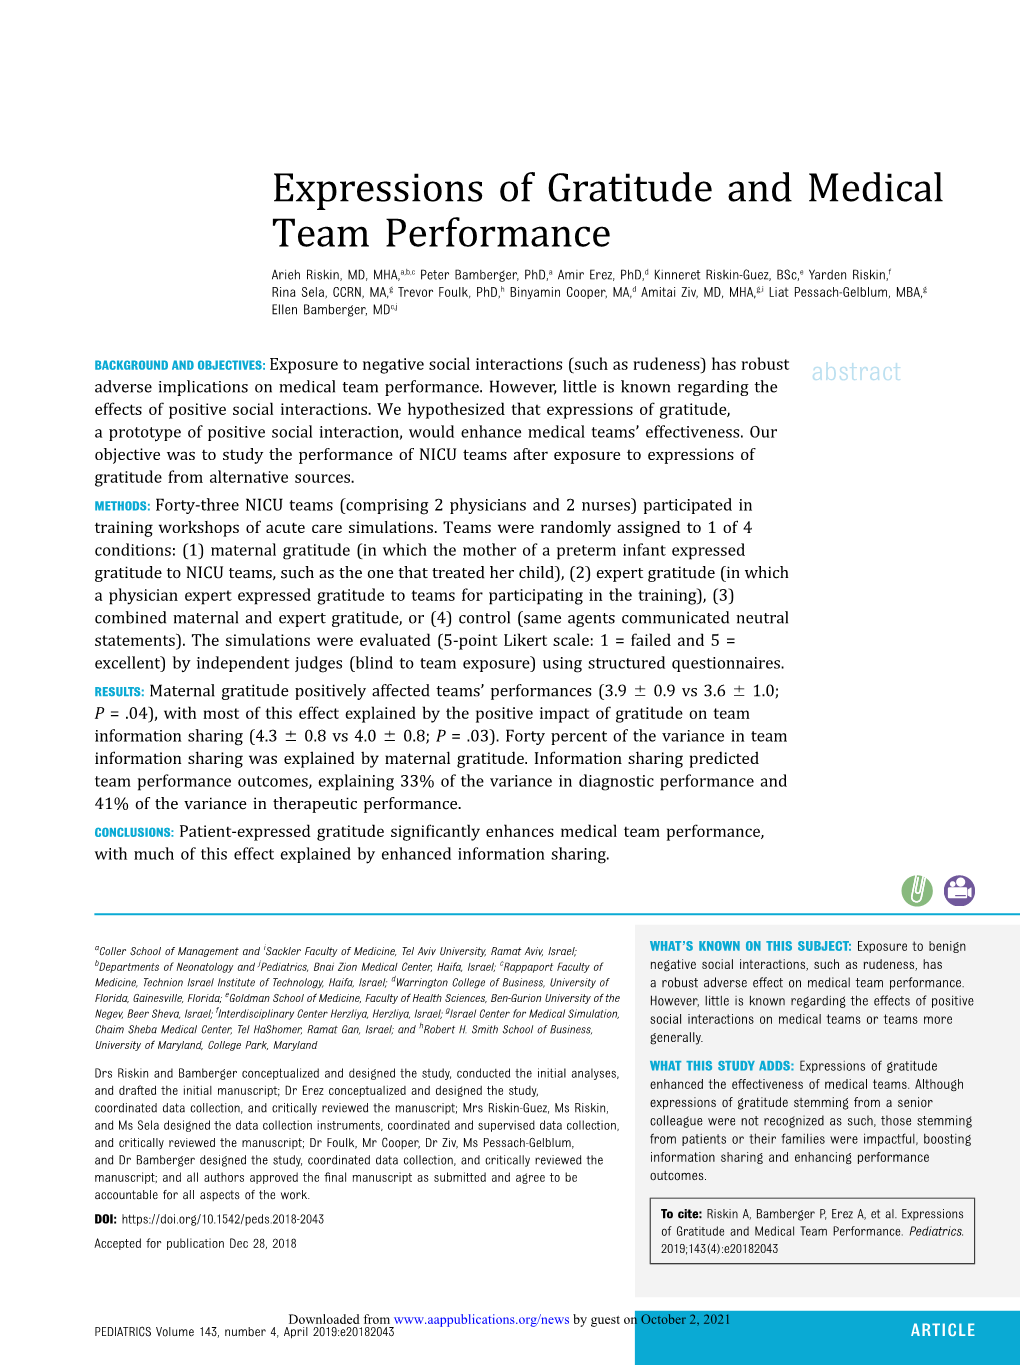 Expressions of Gratitude and Medical Team Performance